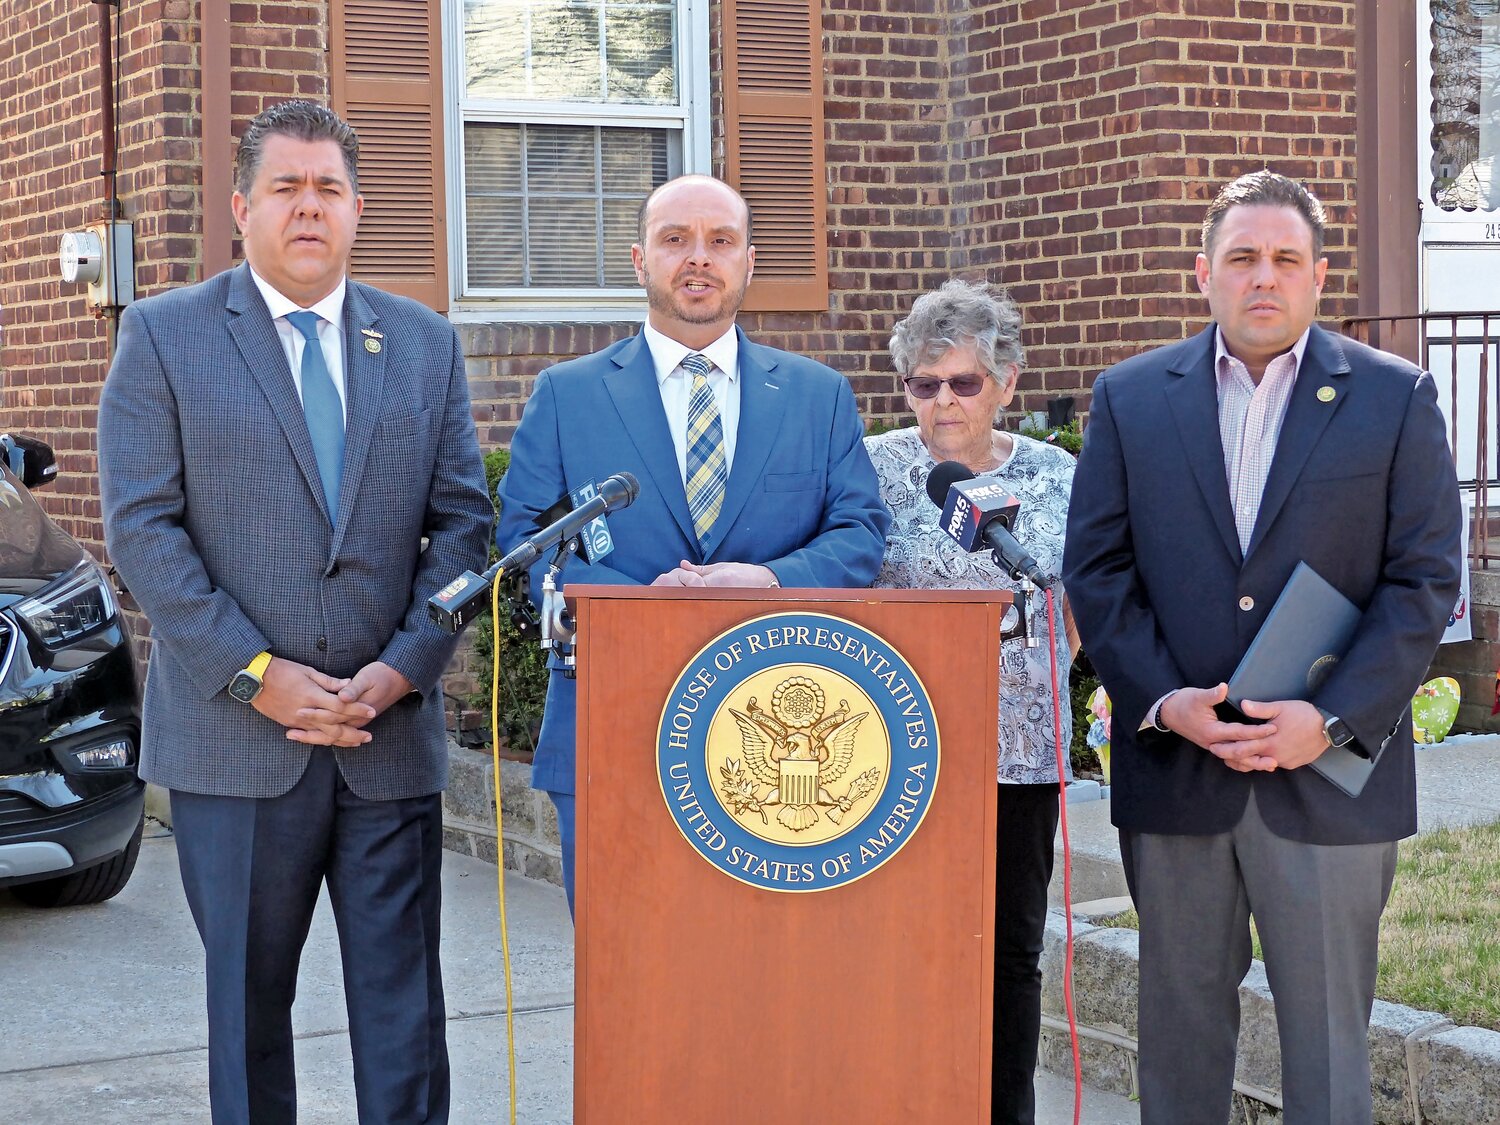 Joining Rep. Anthony D’Esposito, far right, were Reps. Nick LaLota and Andrew Garbarino, as well as Franklin Square resident Ellen Andrasick, to introduce the SALT Deductibility Act of 2023.